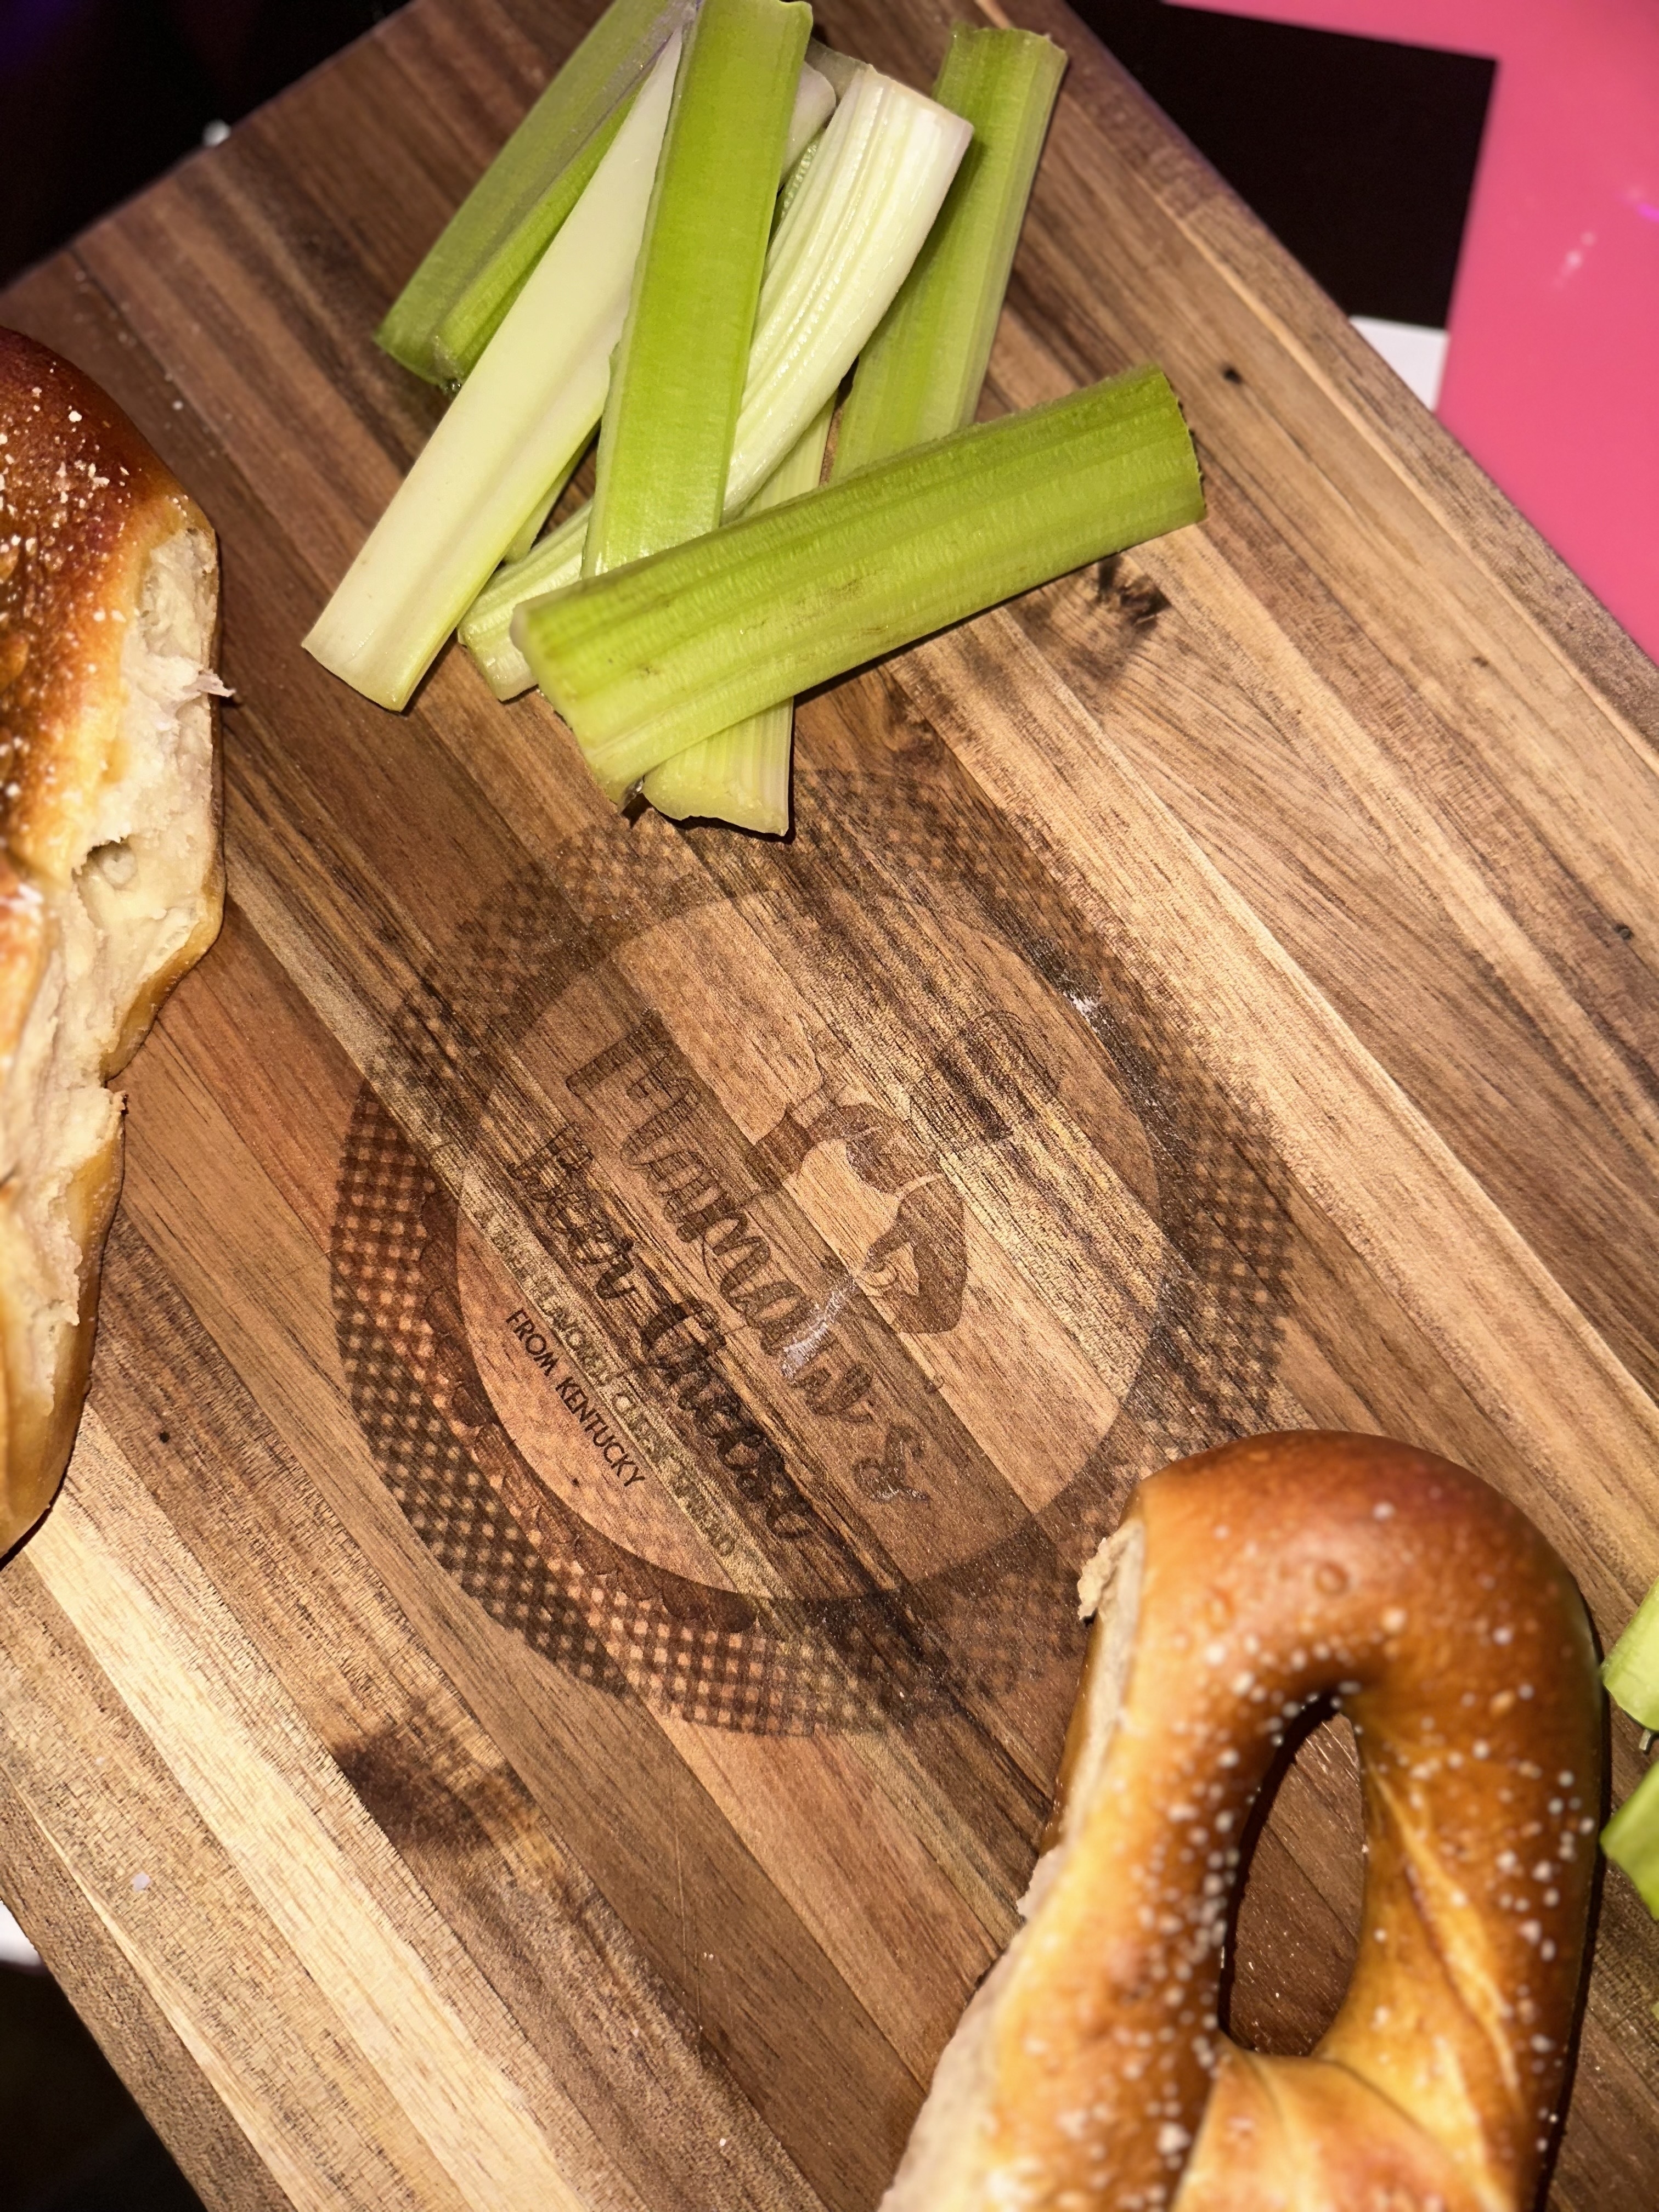 Pretzel and celery sticks presented on a wooden cutting board with an engraved logo